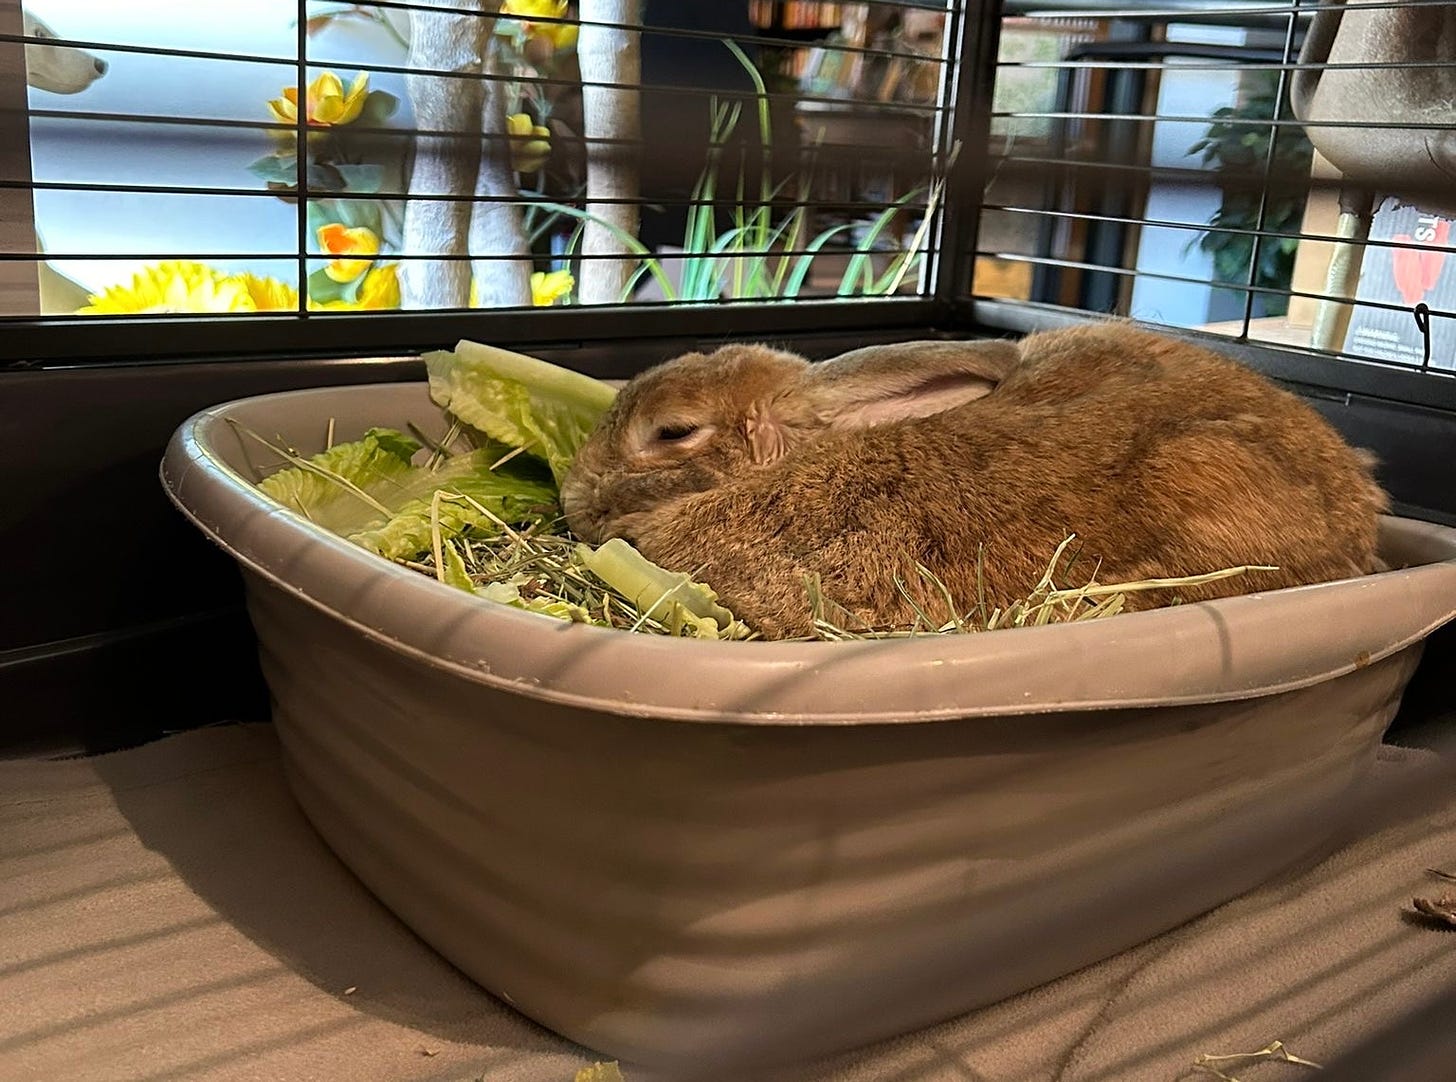 A bunny sitting in a basin filled with straw and lettuce; the basin is in a cage